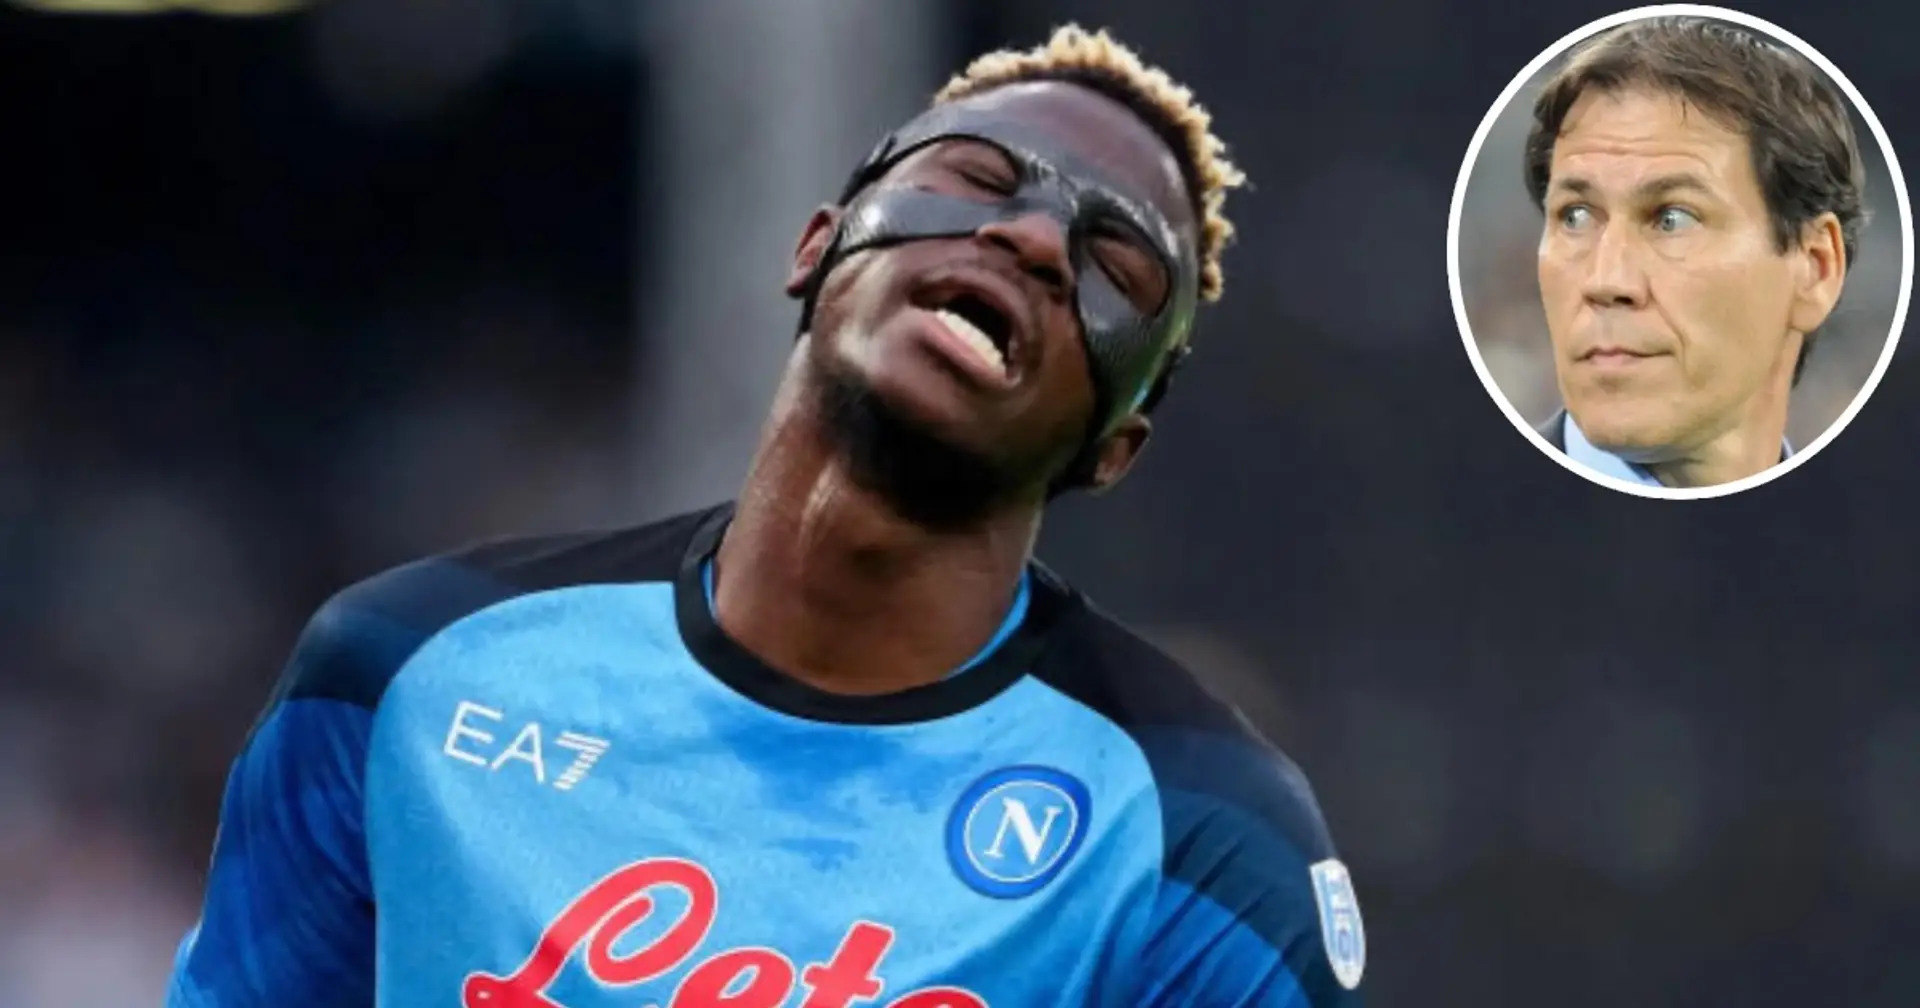 'I have spoken to him': Napoli coach makes admission about Osimhen amid Man United transfer speculation